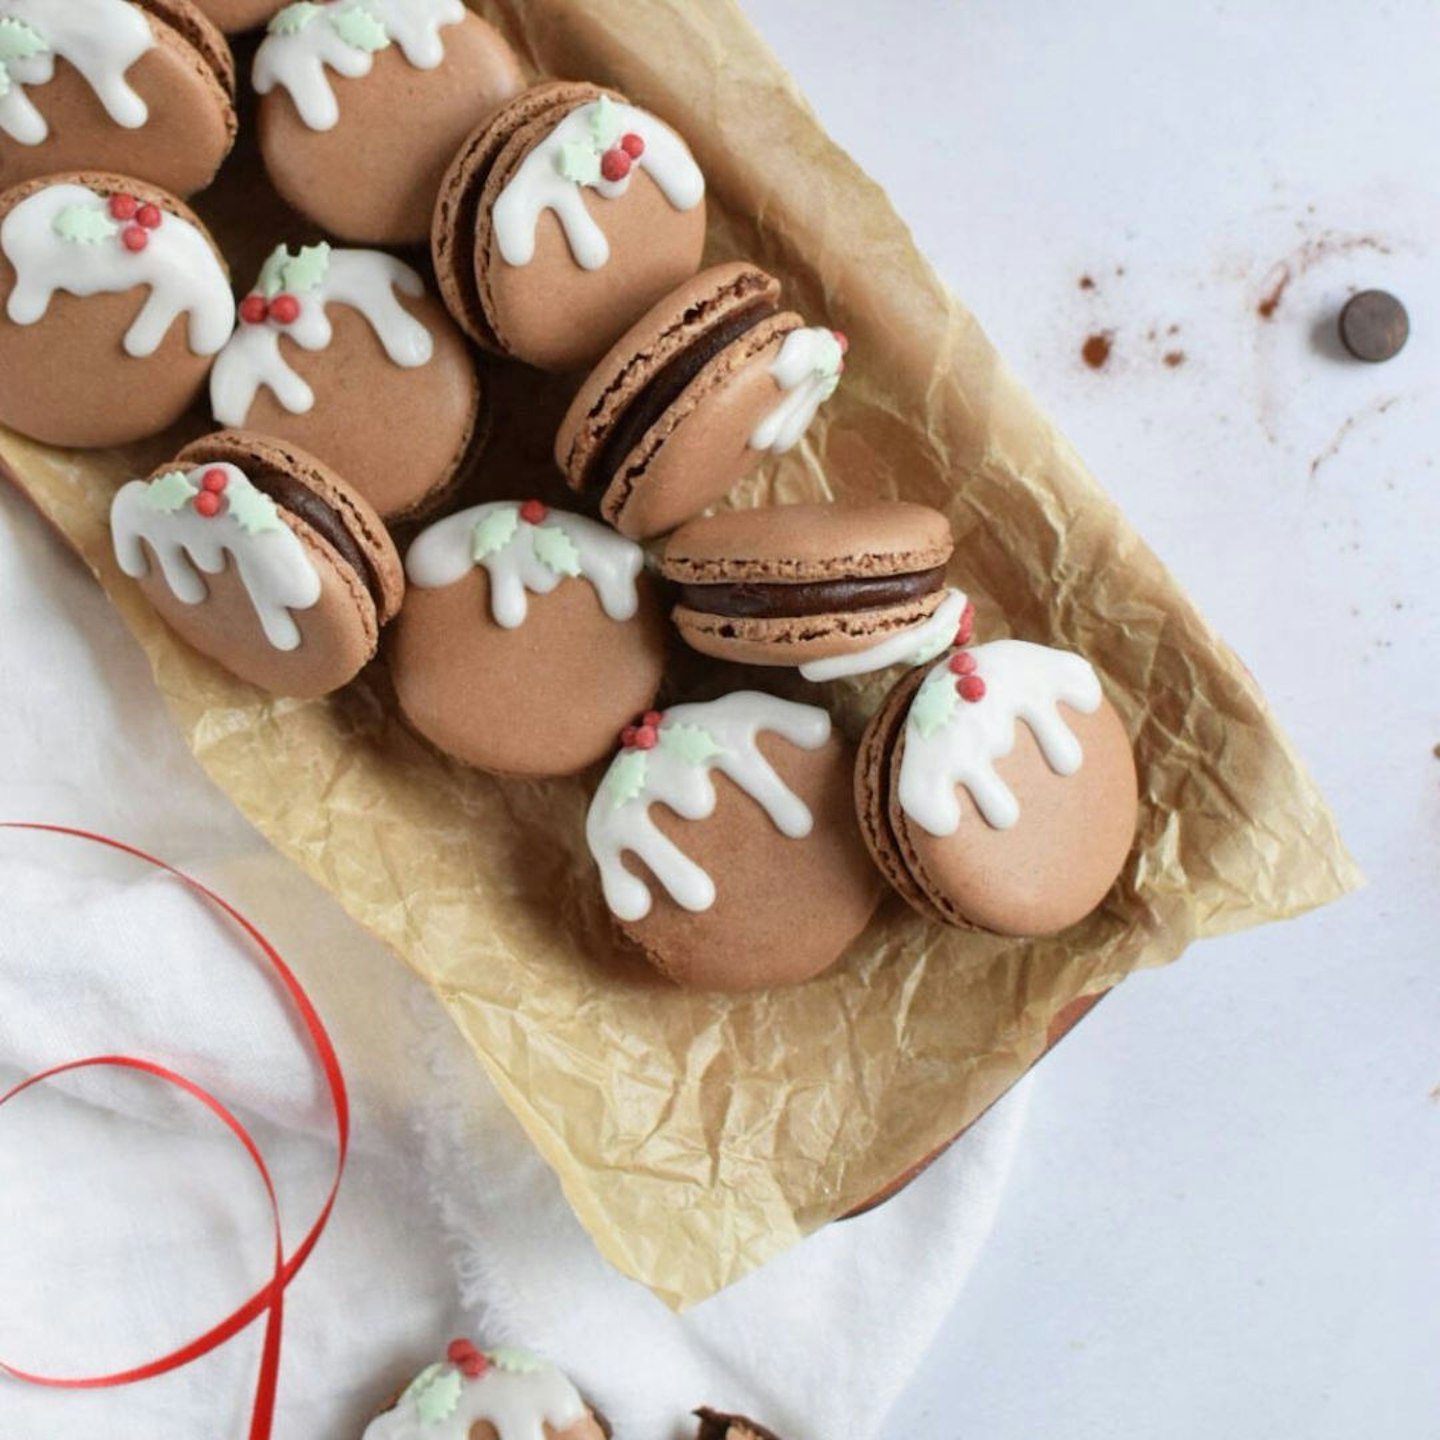 The best cookie decorating kits: Christmas Macaron Kit